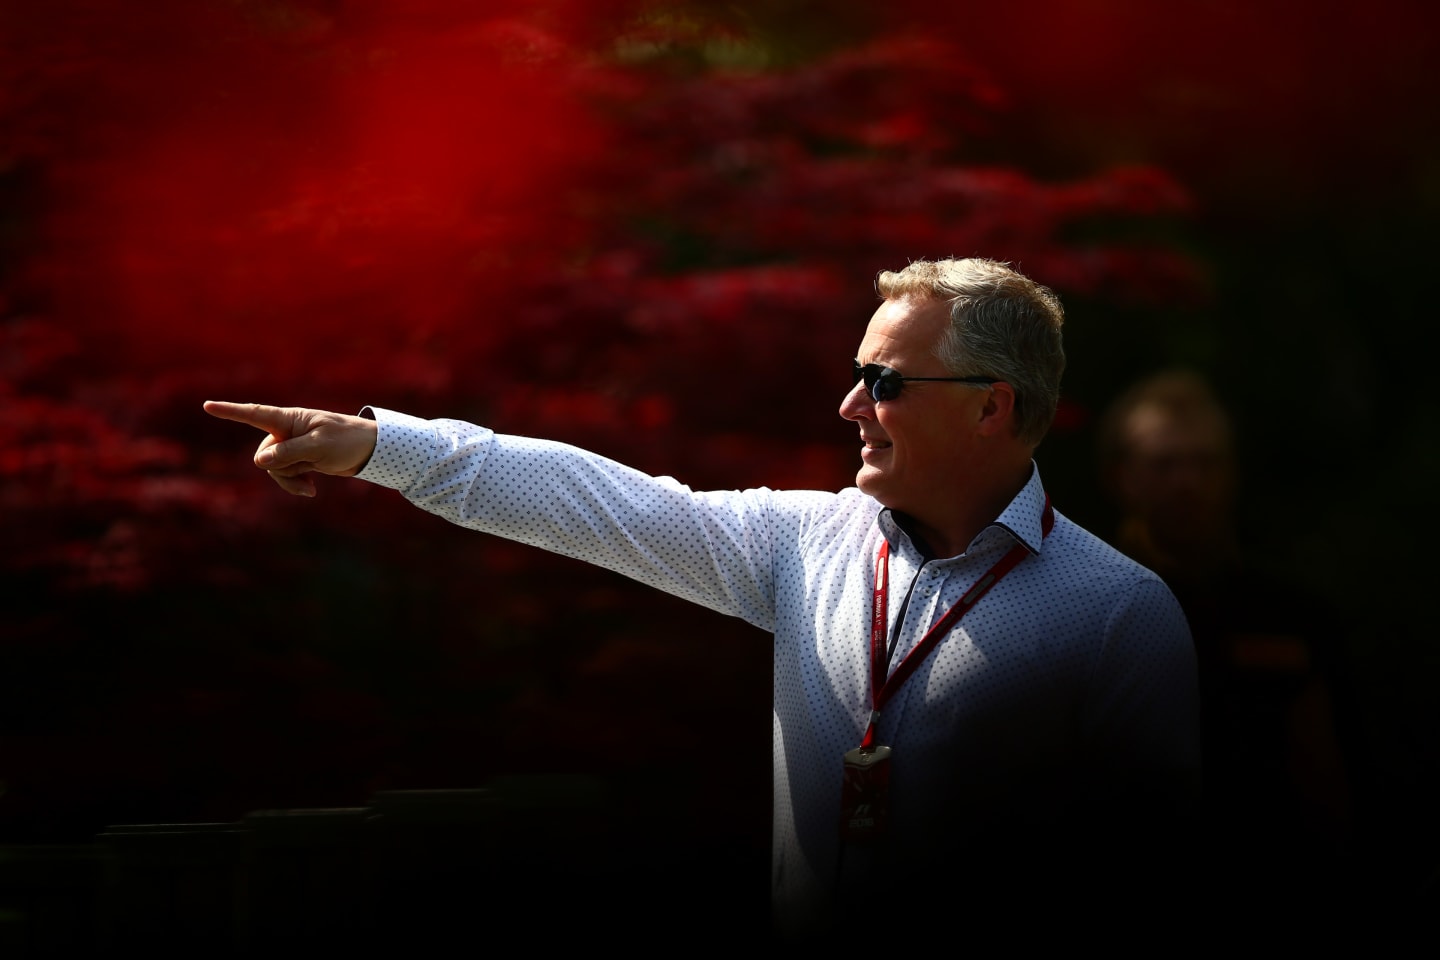 SHANGHAI, CHINA - APRIL 15: Johnny Herbert points at something in the Paddock during practice for